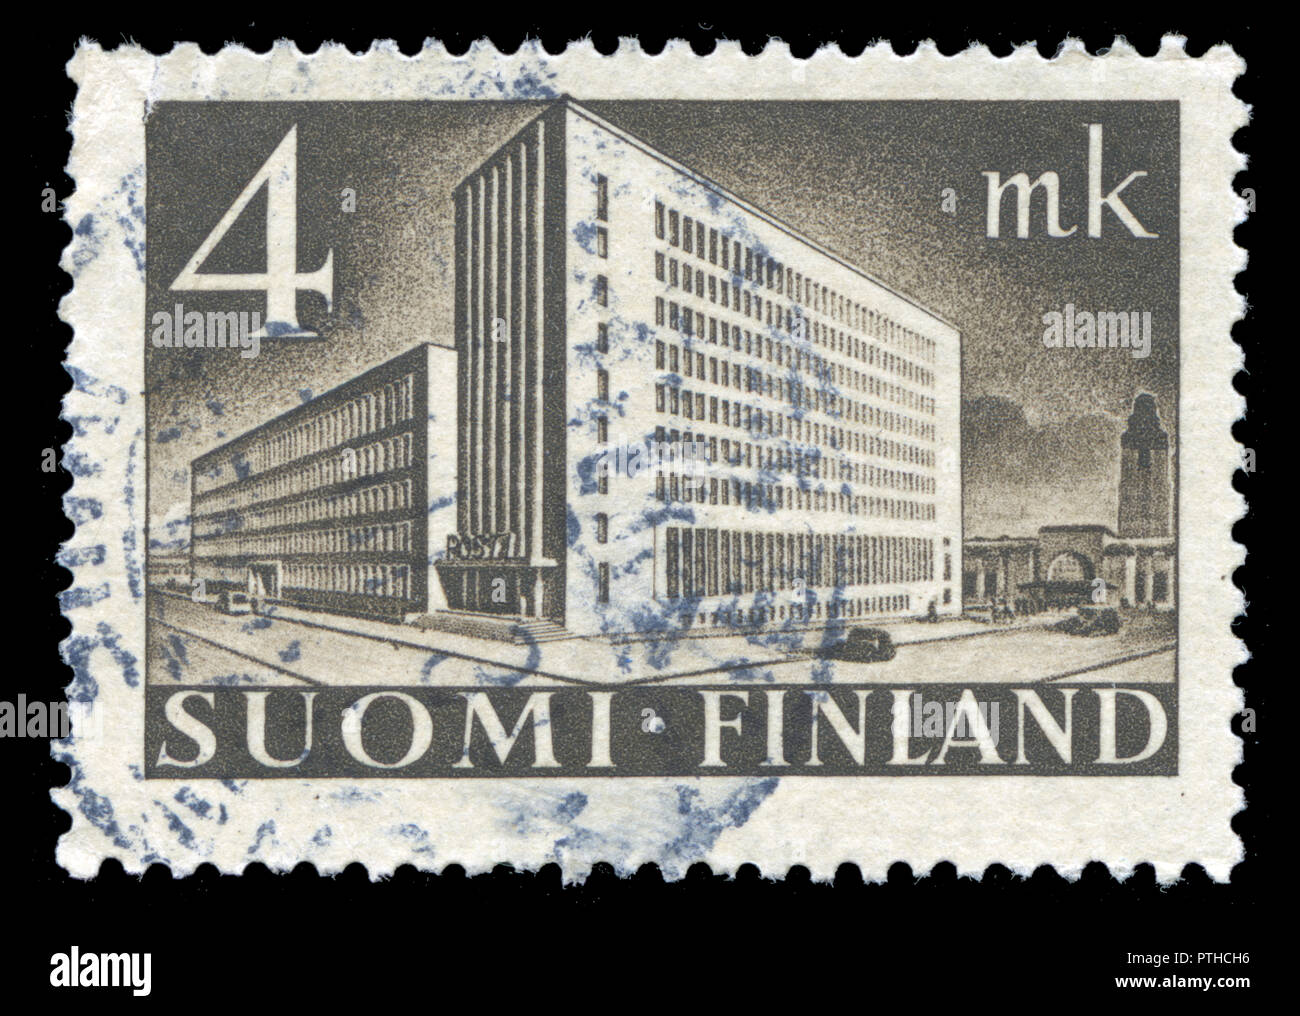 Postmarked stamp from Finland in the Post Administration Building series issued in 1939 Stock Photo